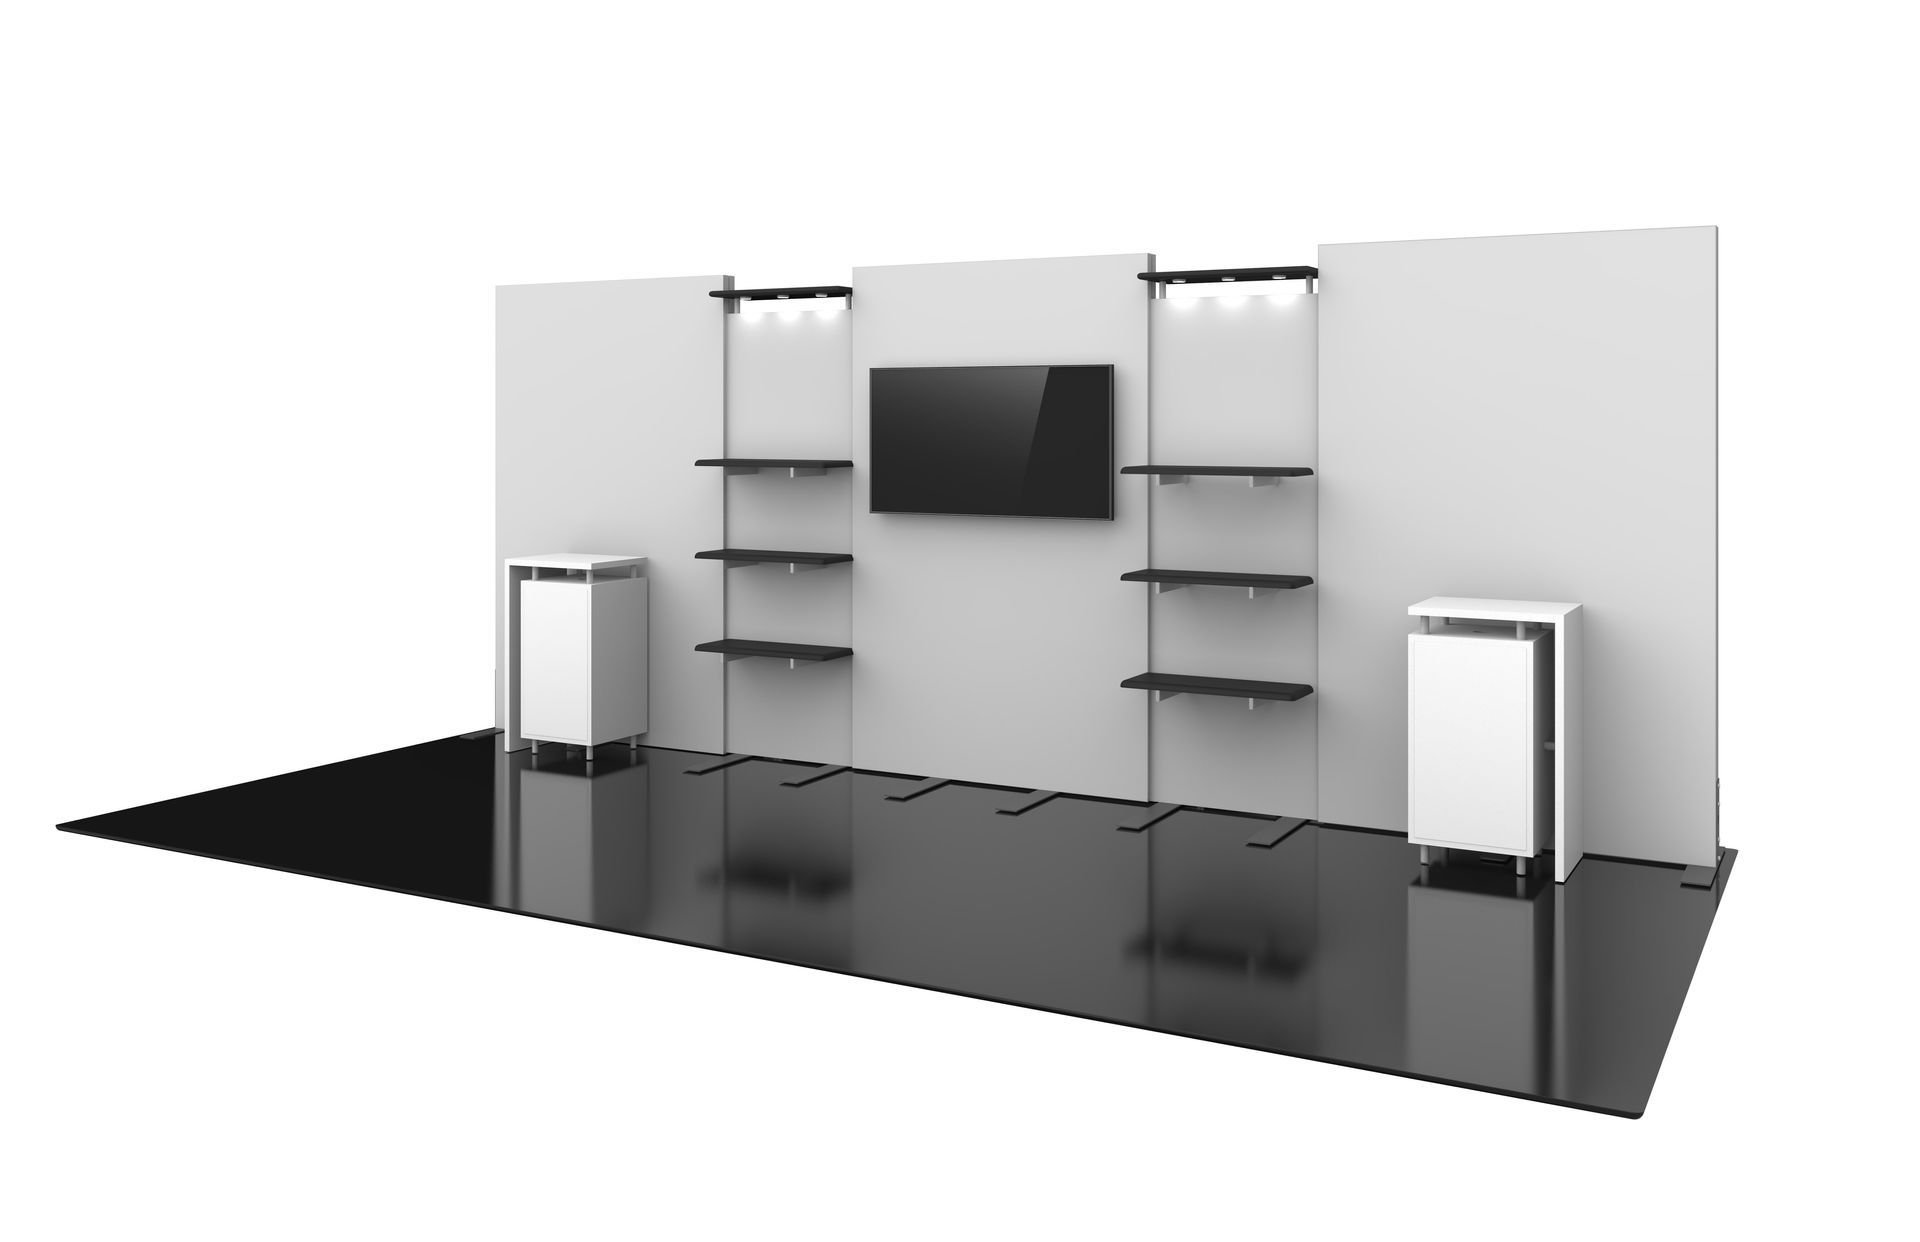 Tenor 10x20 Trade Show Booth Kit for Purchase